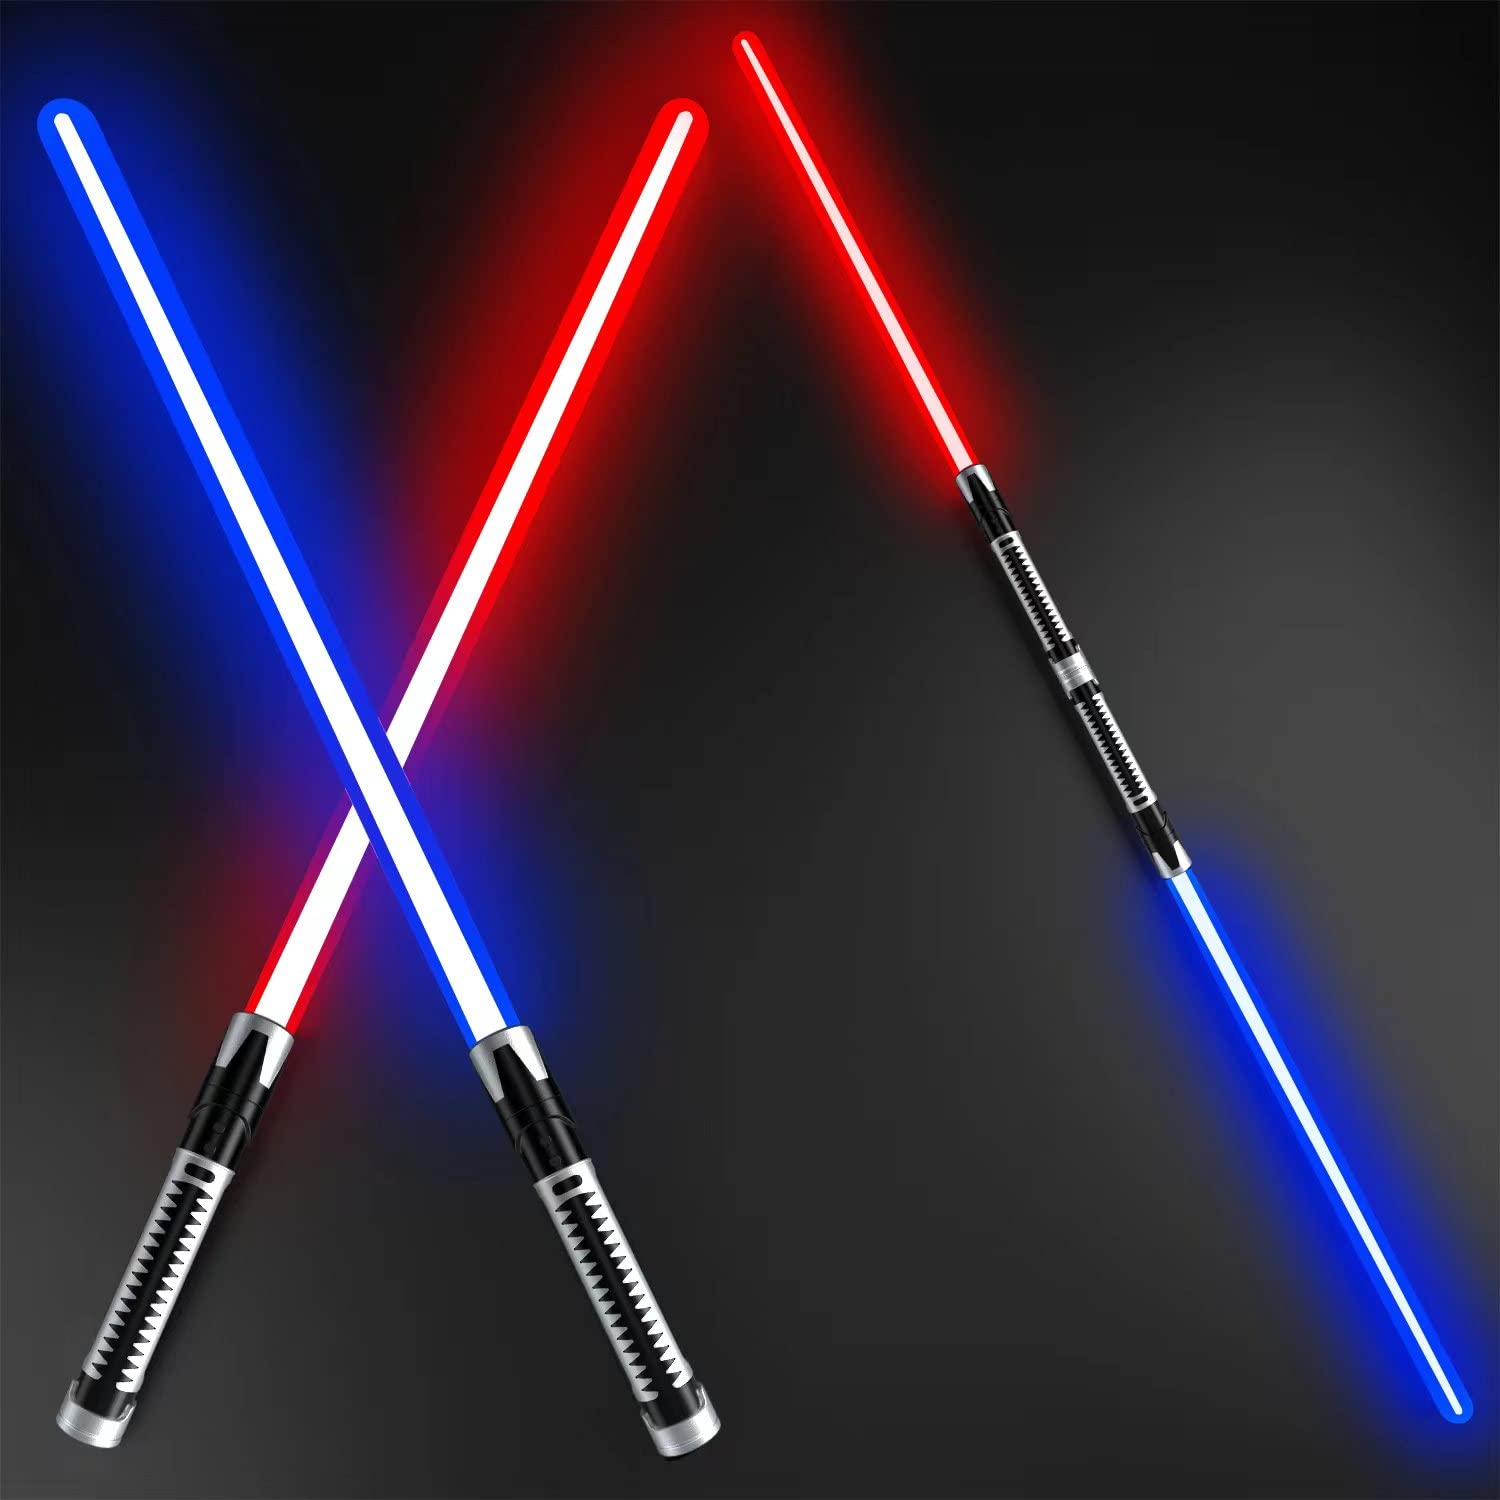 Beyondtrade Lightsabers Toy 7 Colors 2-in-1 LED Dual Swords for Kids with FX Sound (Motion Sensitive) for Movie Fans Cosplay Party Christmas Birthday Gift